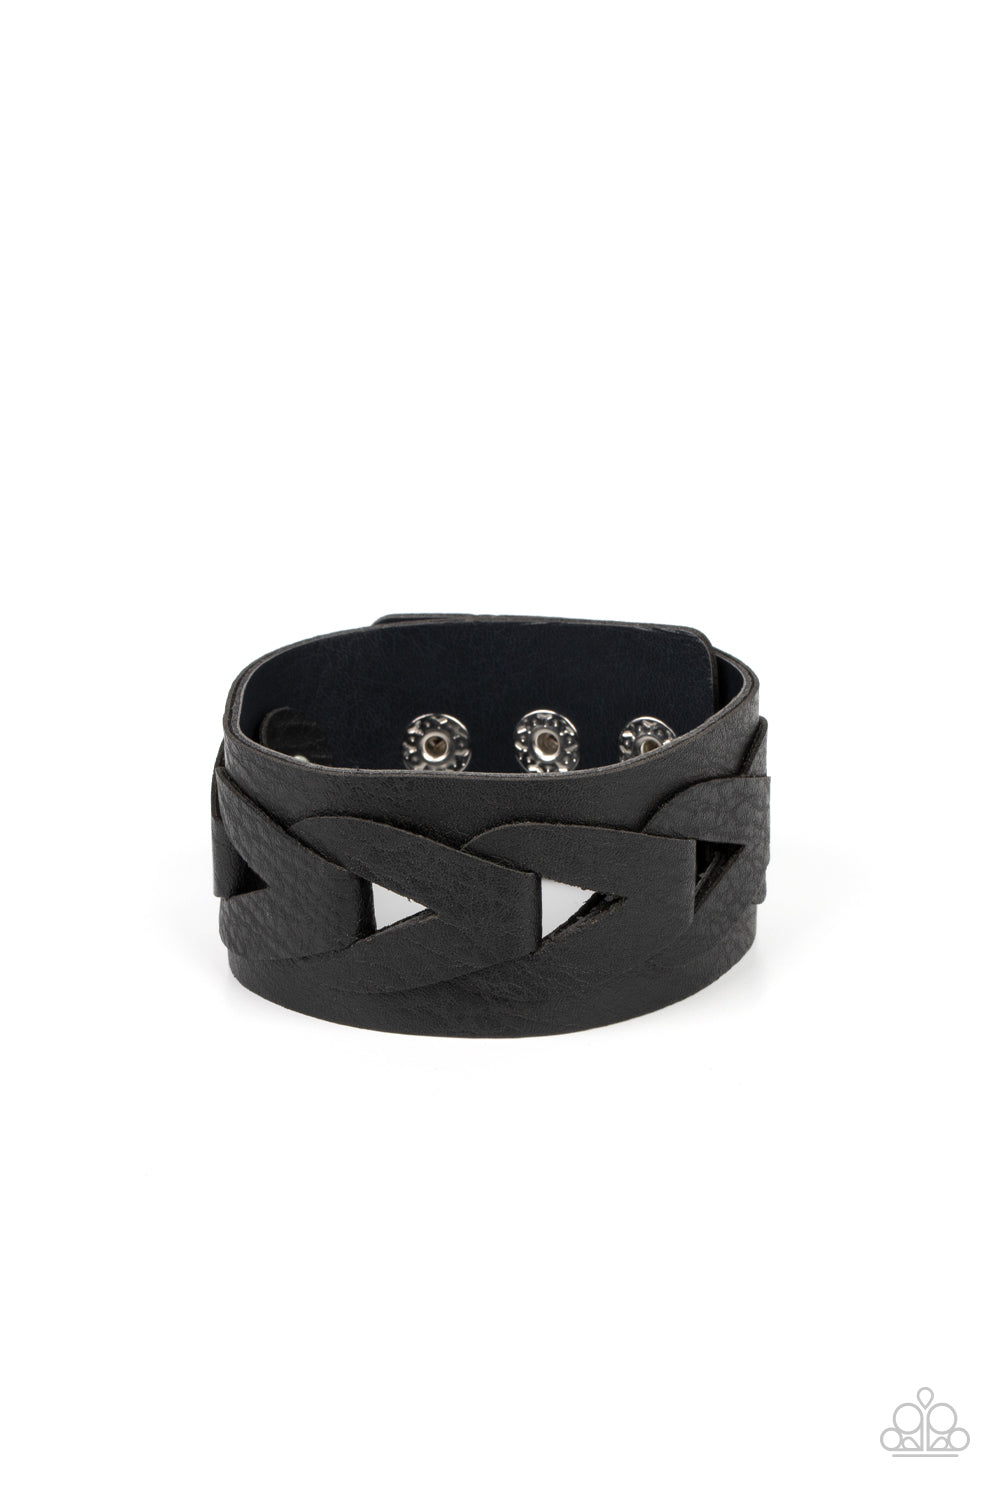 HORSE AND CARRIAGE BLACK-BRACELET